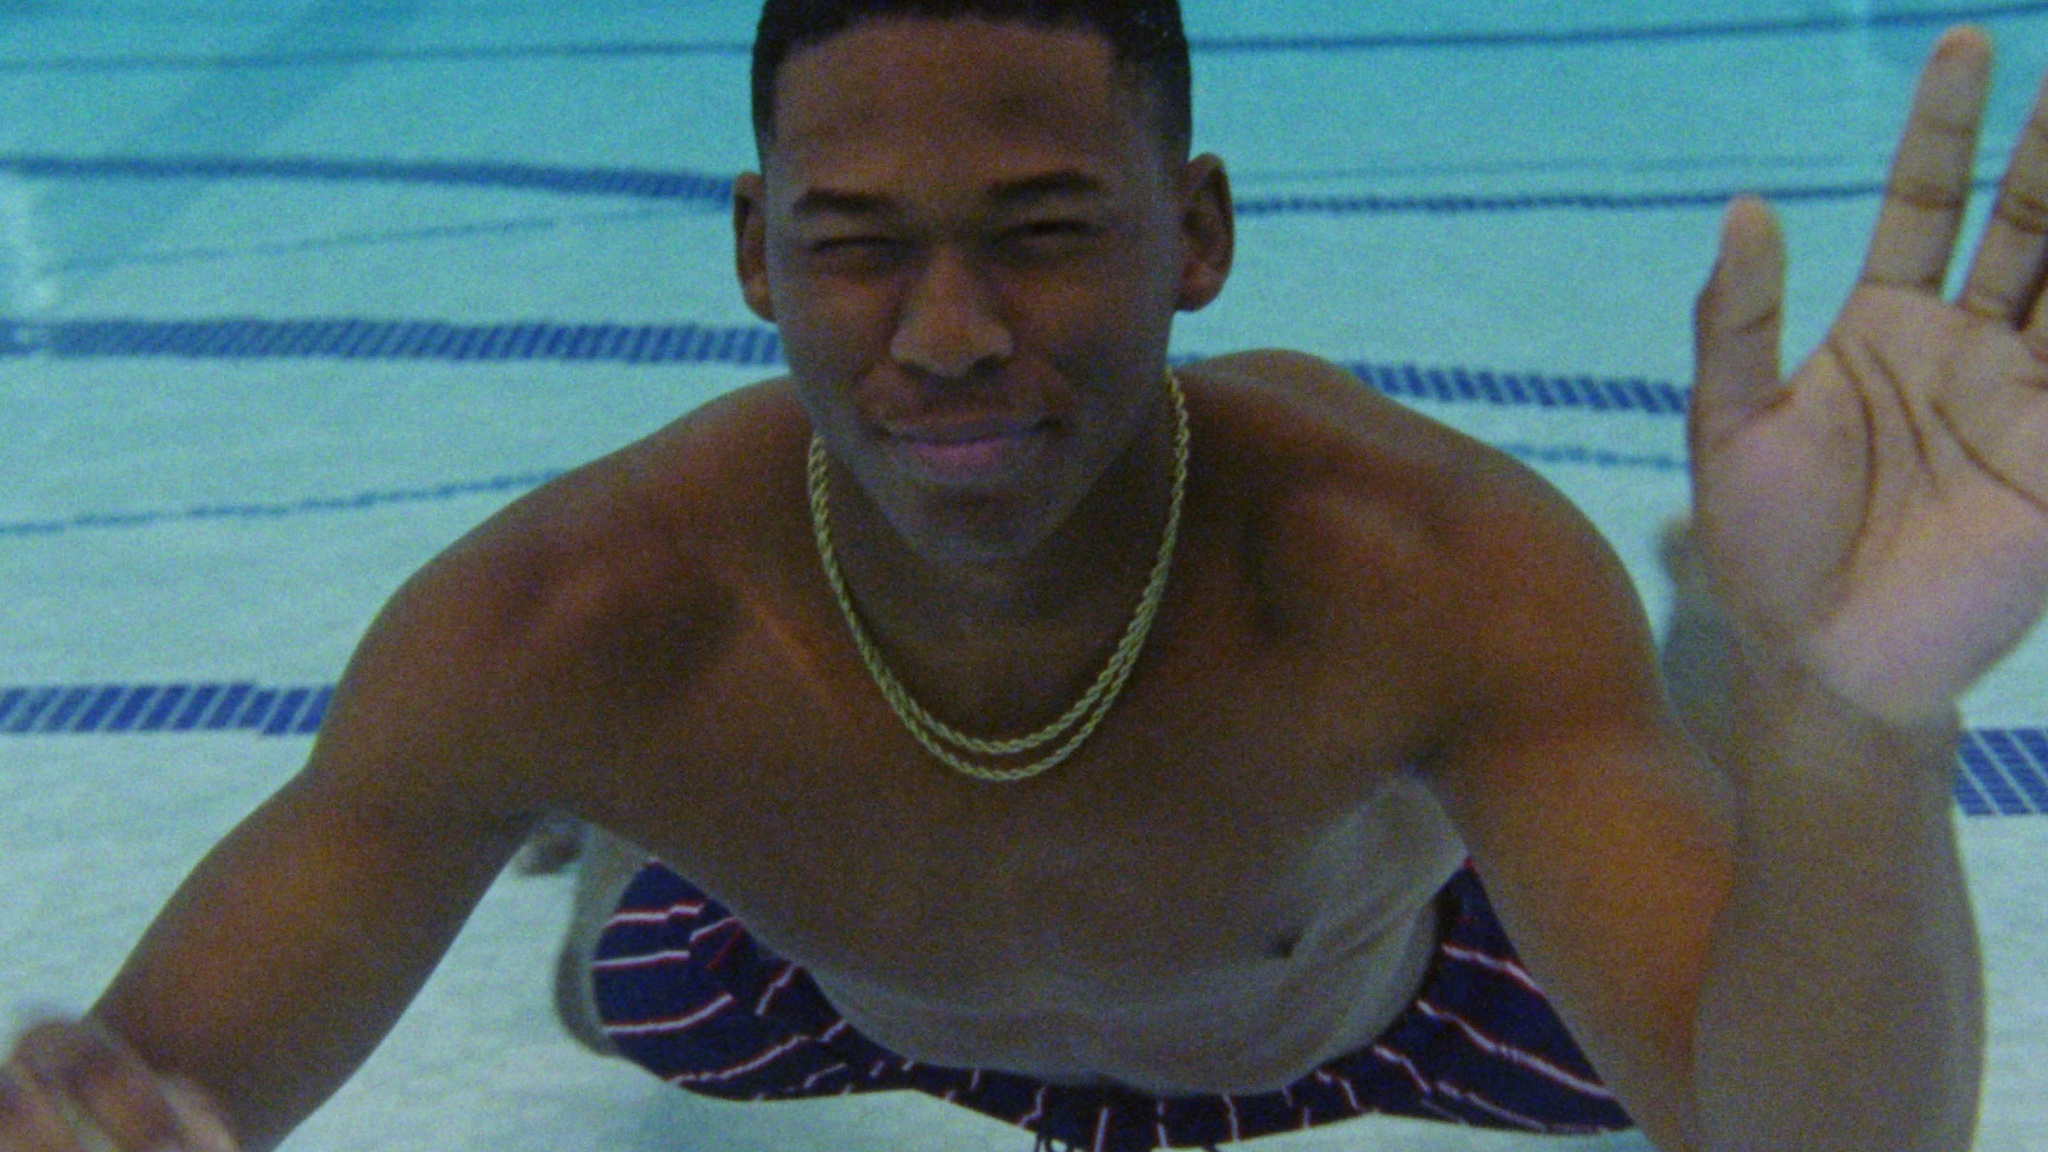 A young man underwater in a pool with one hand up waving